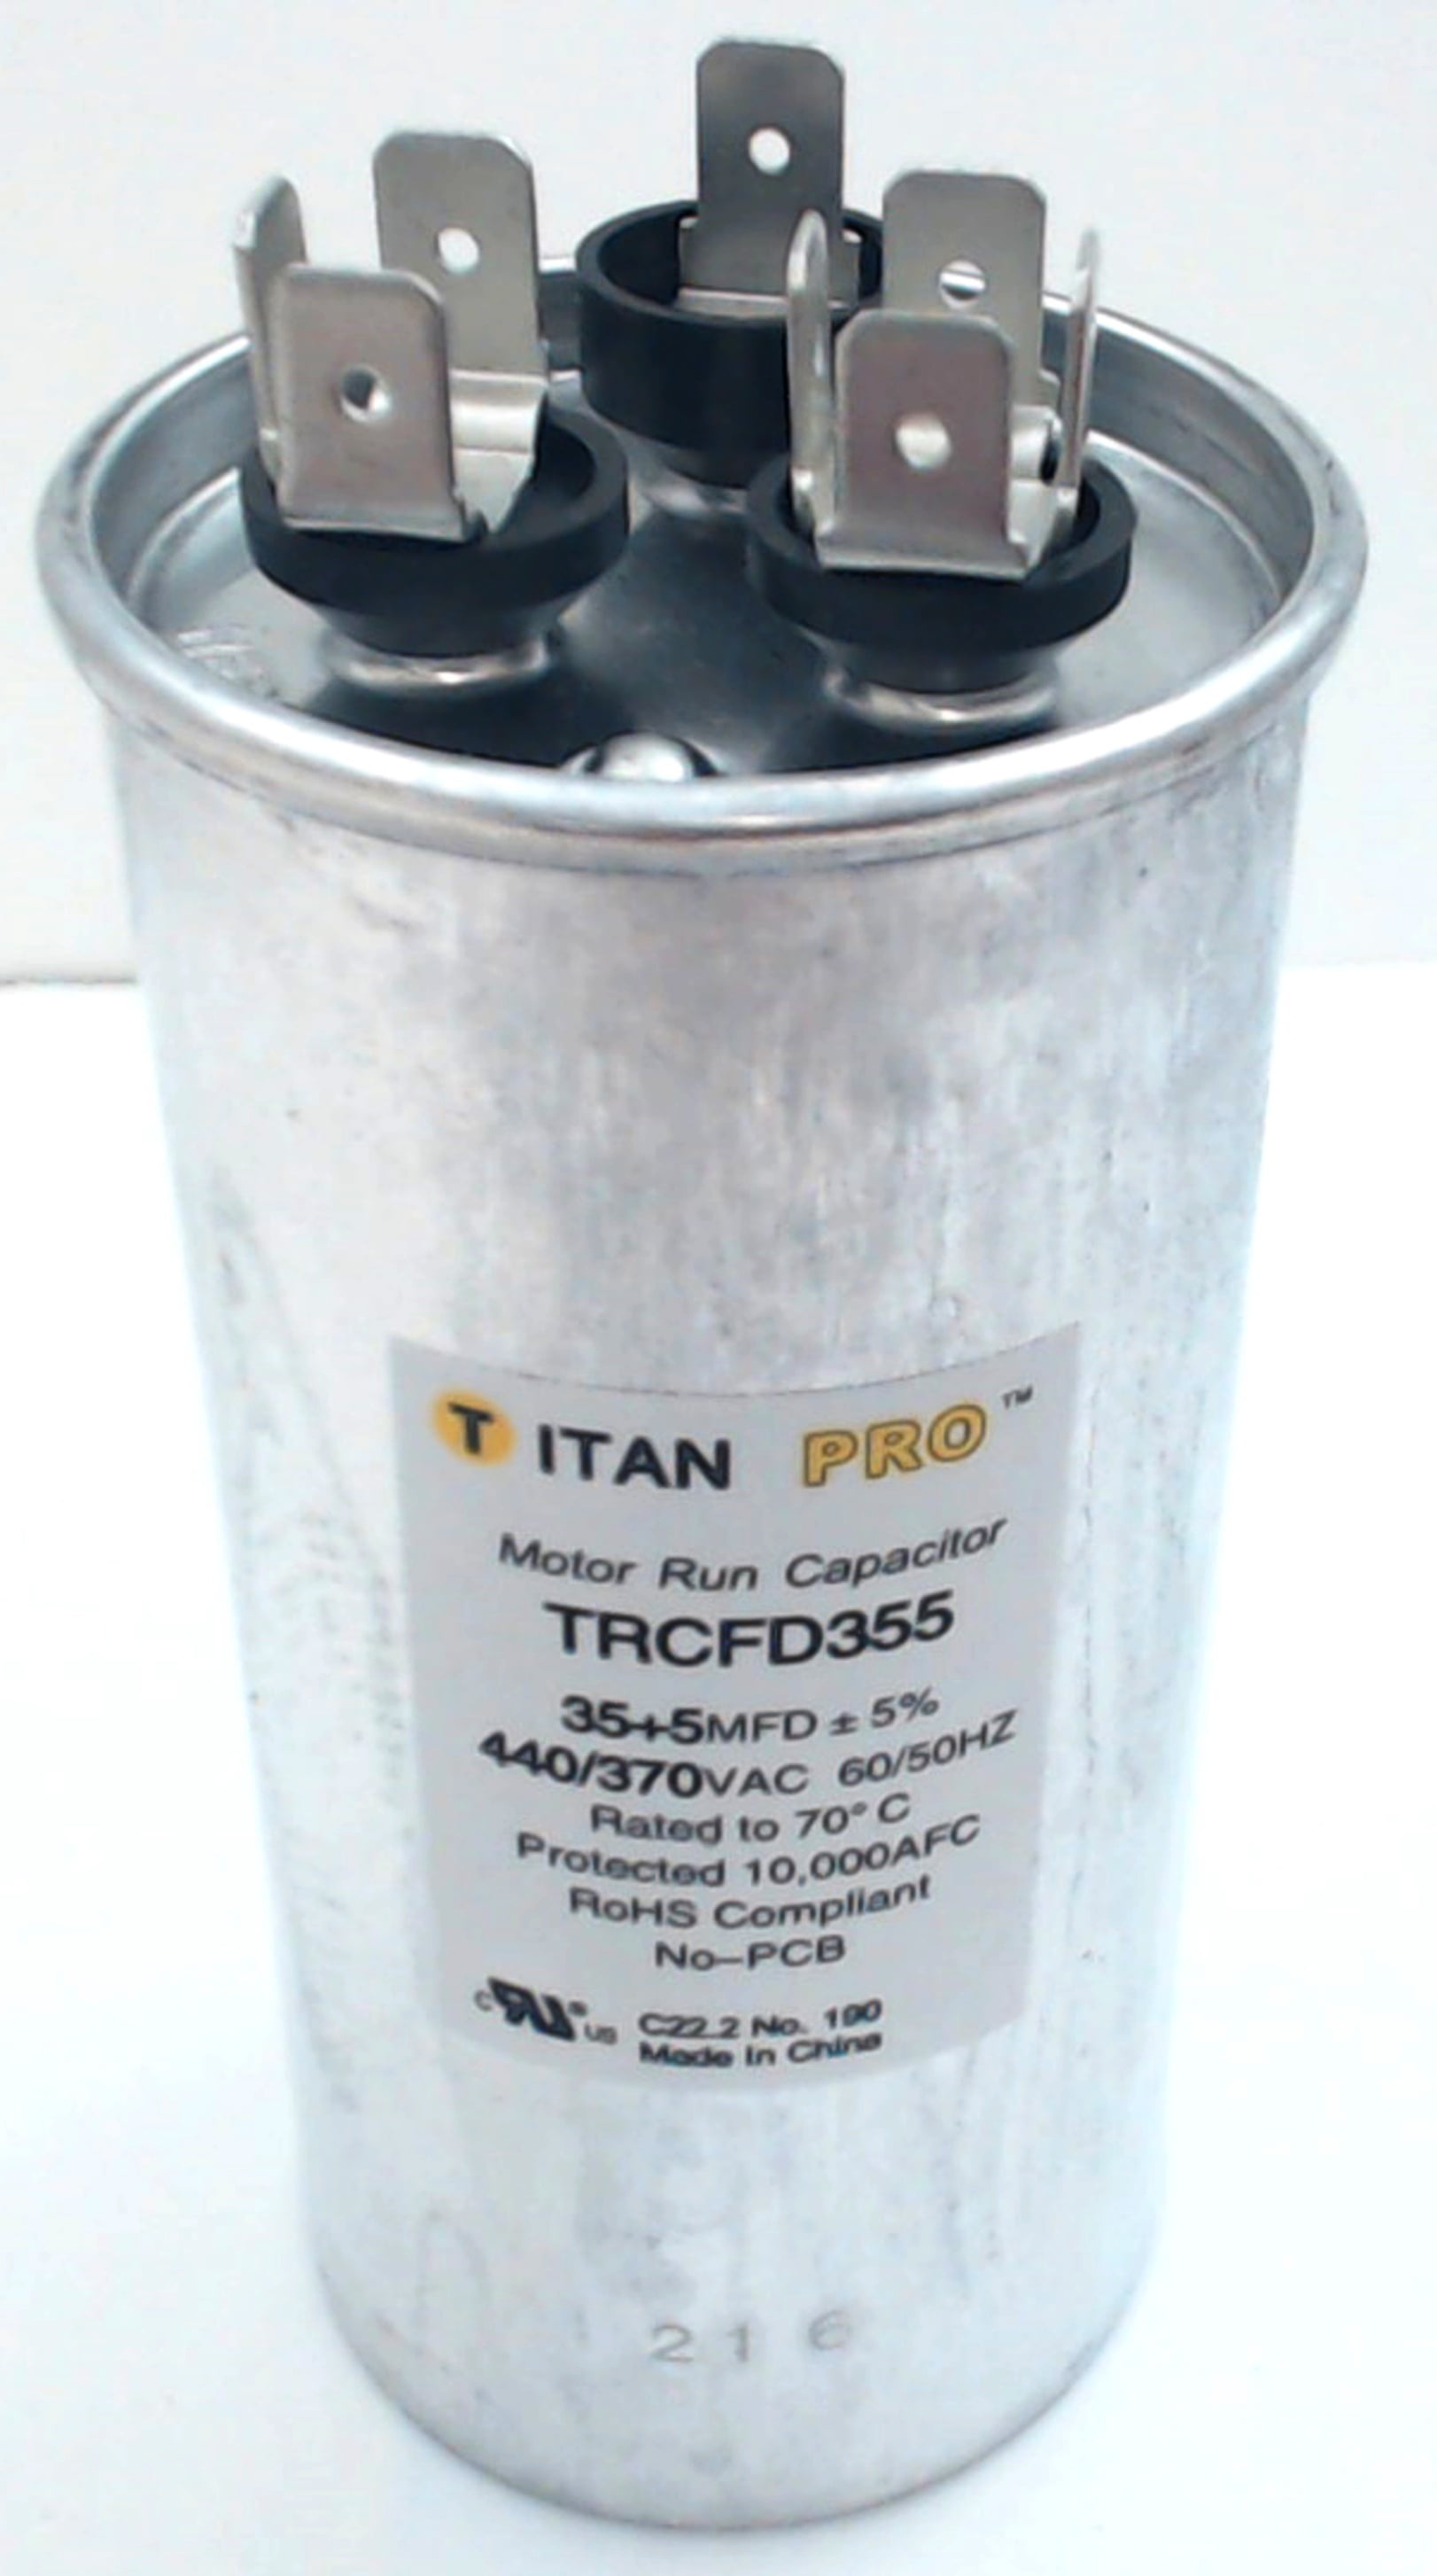 Prcfd355a Packard TITAN HD Run Capacitor Round 35 5 MFD 440-370v for sale online 